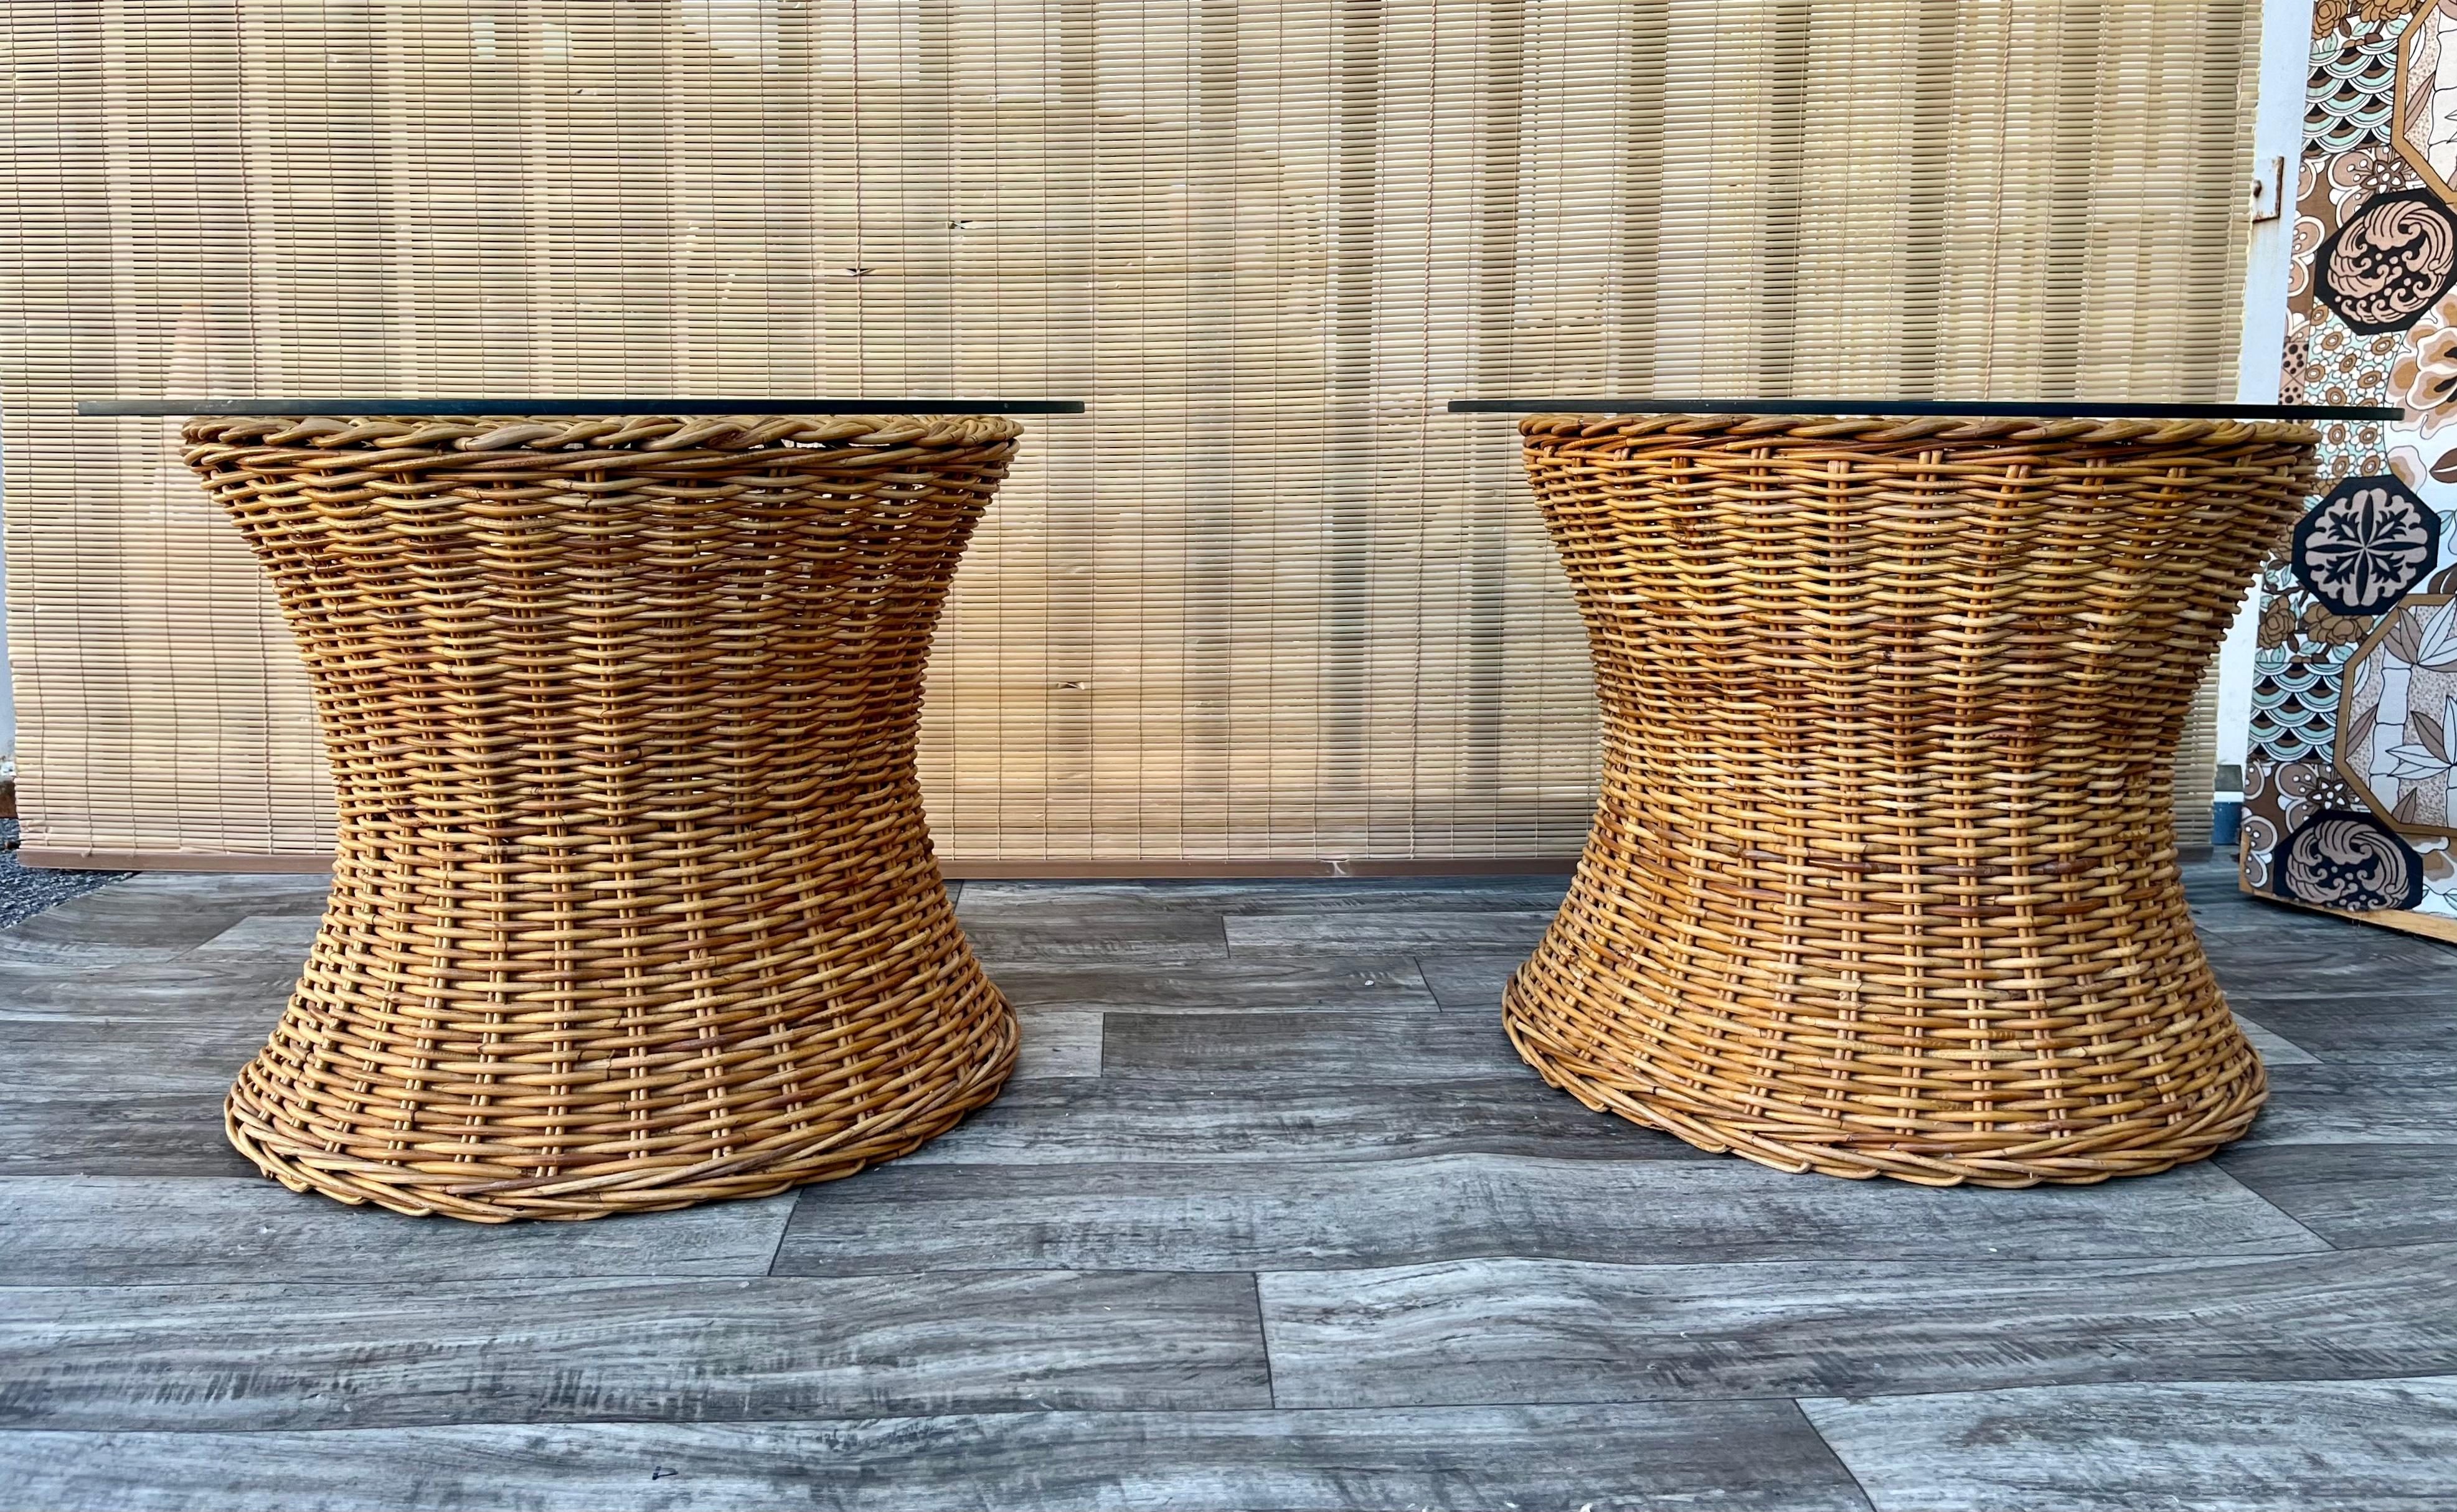 A Pair of Vintage Large Scale, Natural Wicker/Rattan Coastal Style Round Side Tables in the Bielecky Brothers' manner. Circa 1970s
Features a beautiful glowing honey colored weaved rattan frame with an elegant braided trim detail at top edges, and